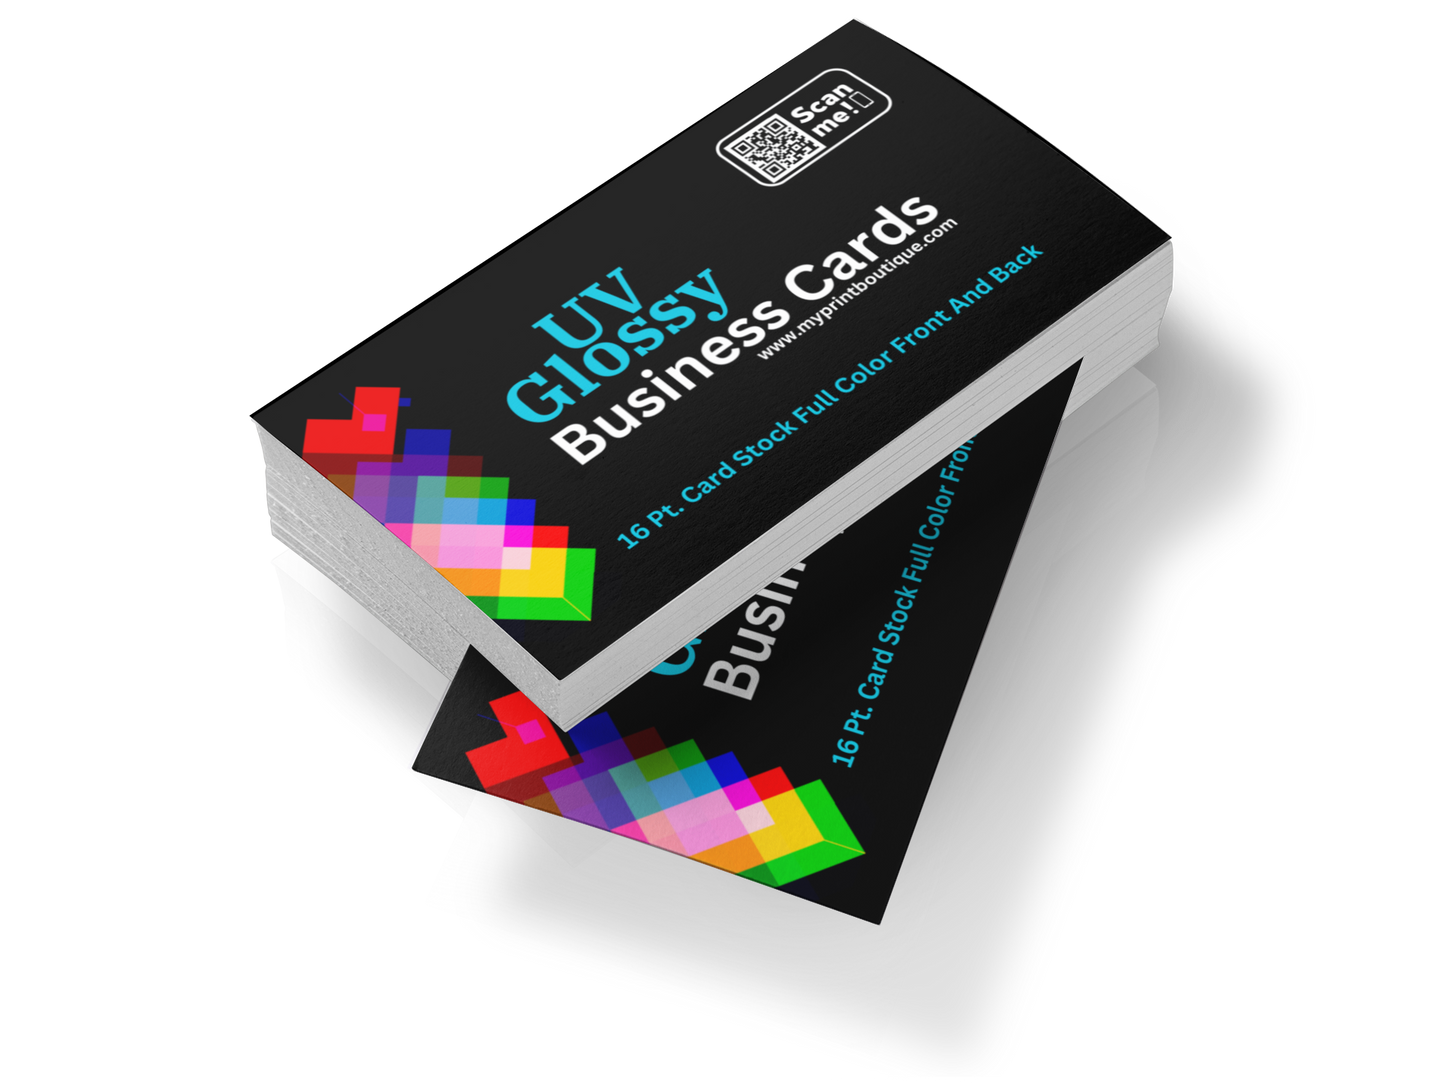 1000 Glossy Full Color Business Cards